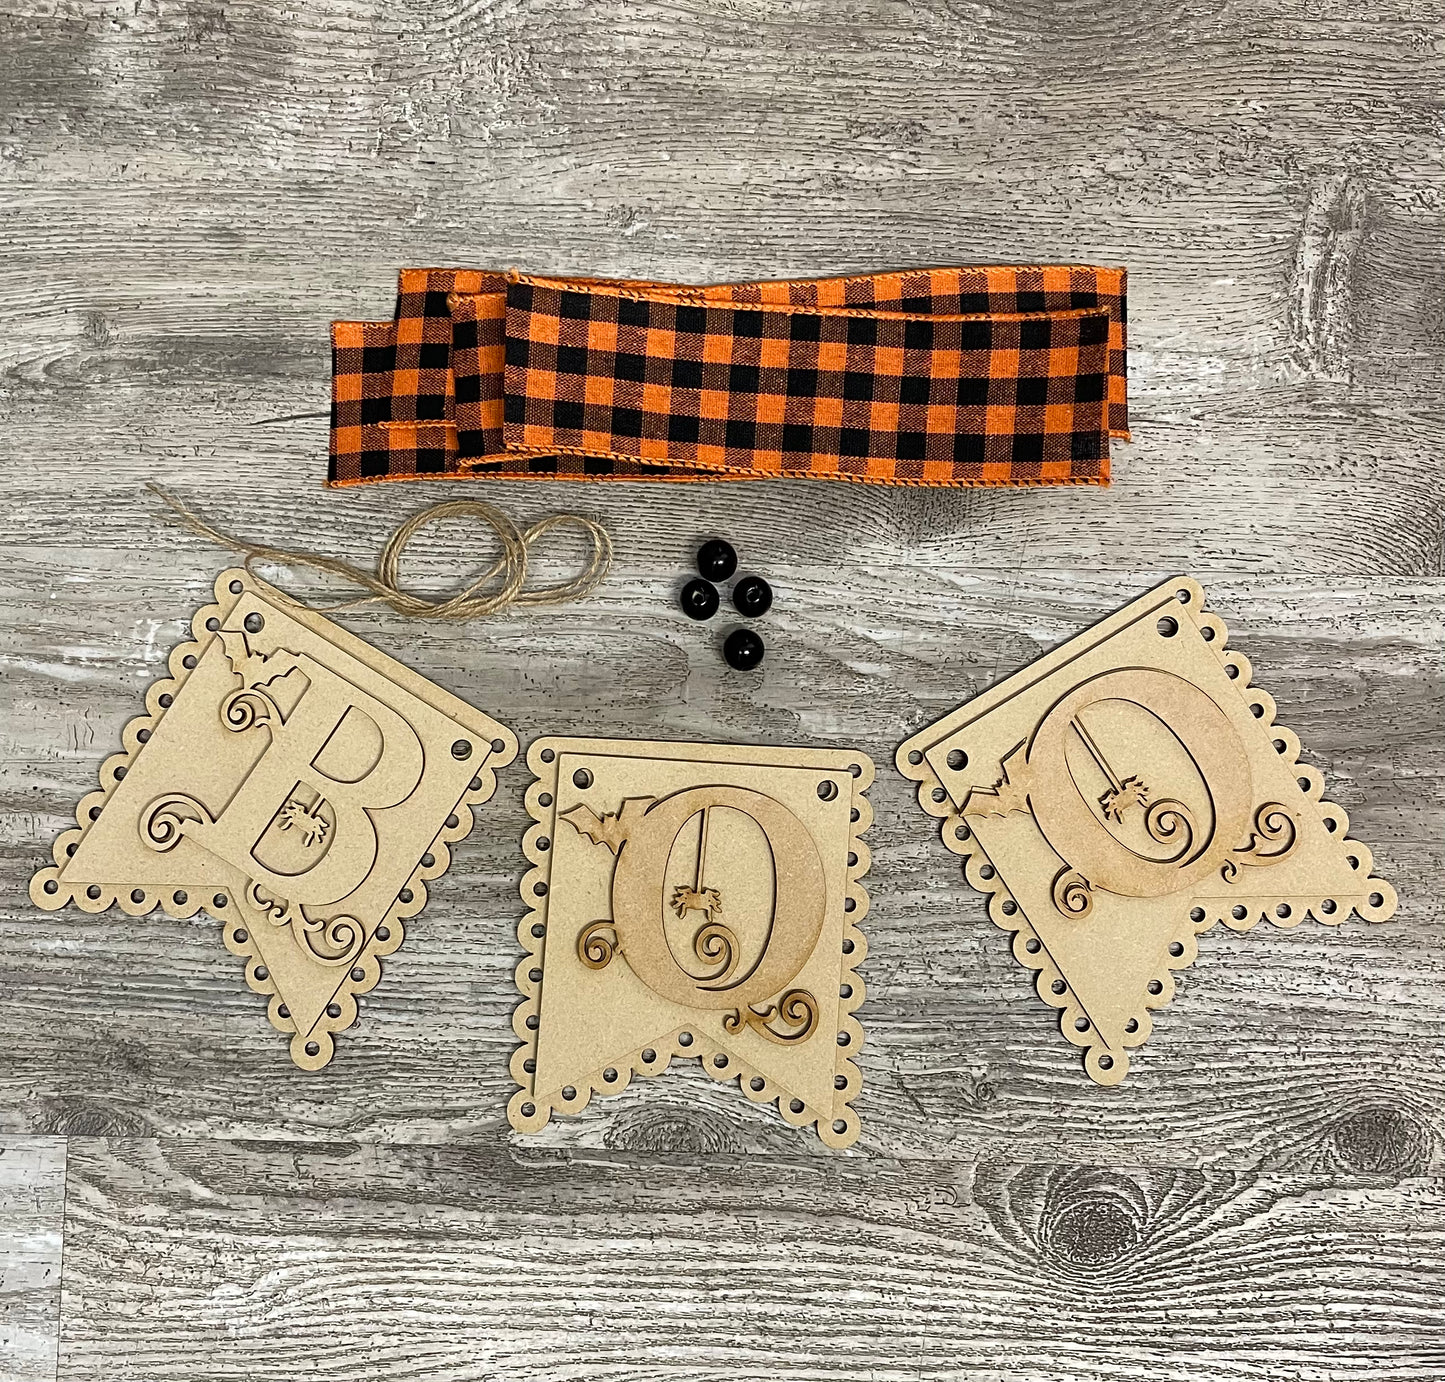 Boo Halloween Garland kit, unpainted wooden cutouts - Bee kit ready for you to paint, includes jute